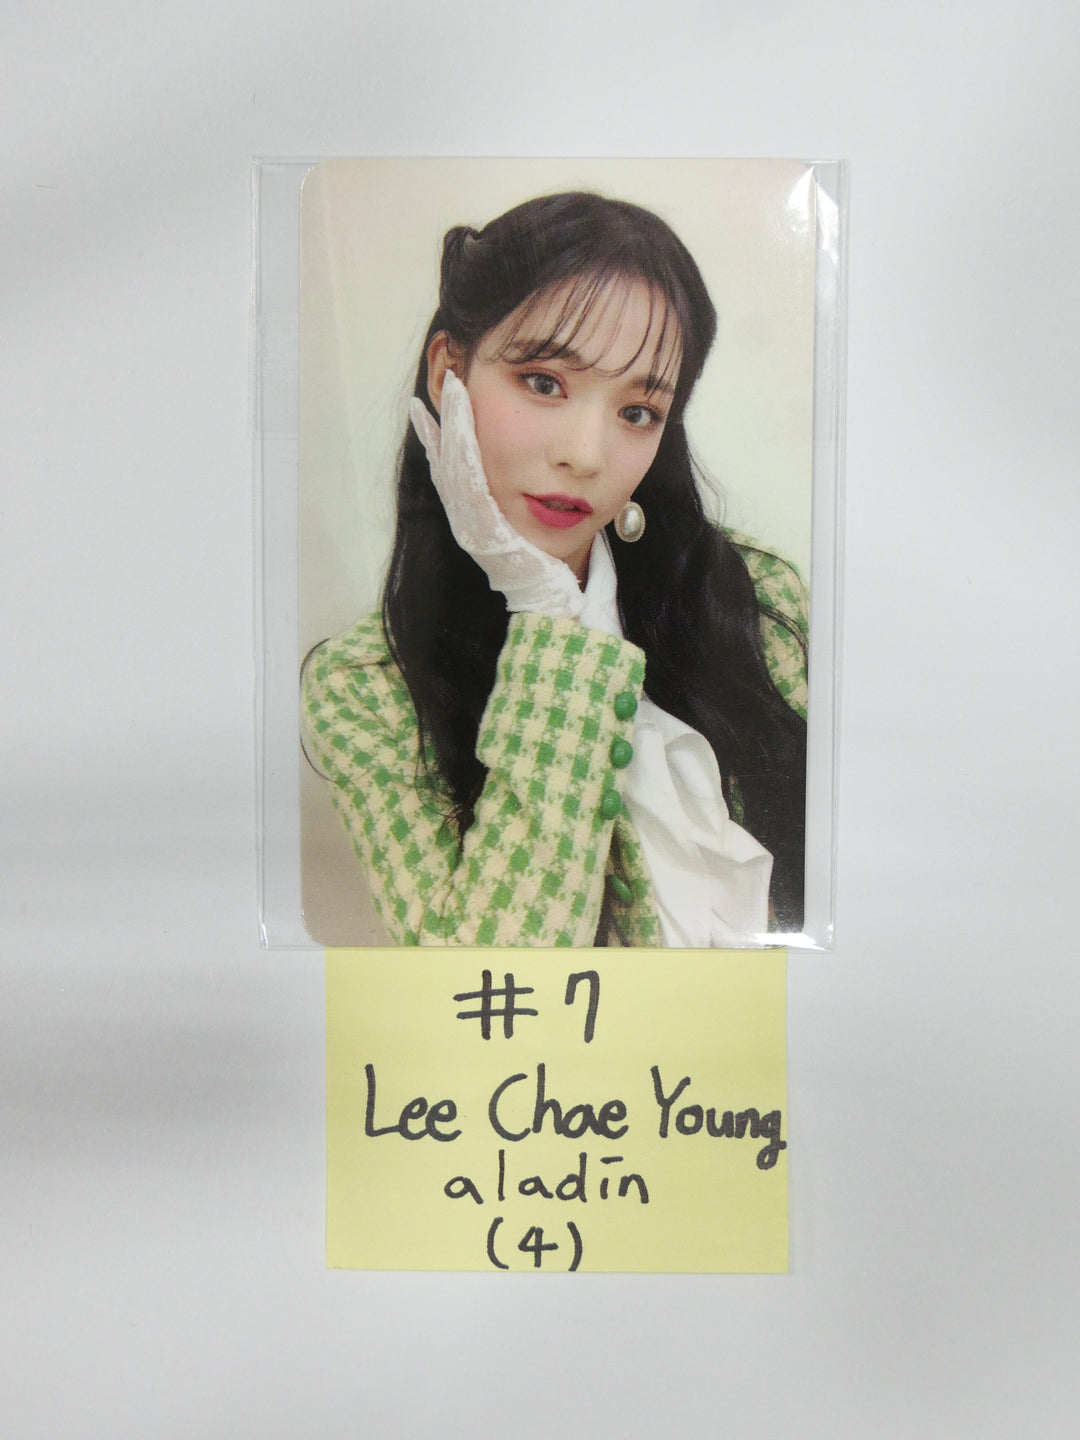 Fromis_9 "9 Way Ticket" - Aladin Pre-order Benefit Photocard